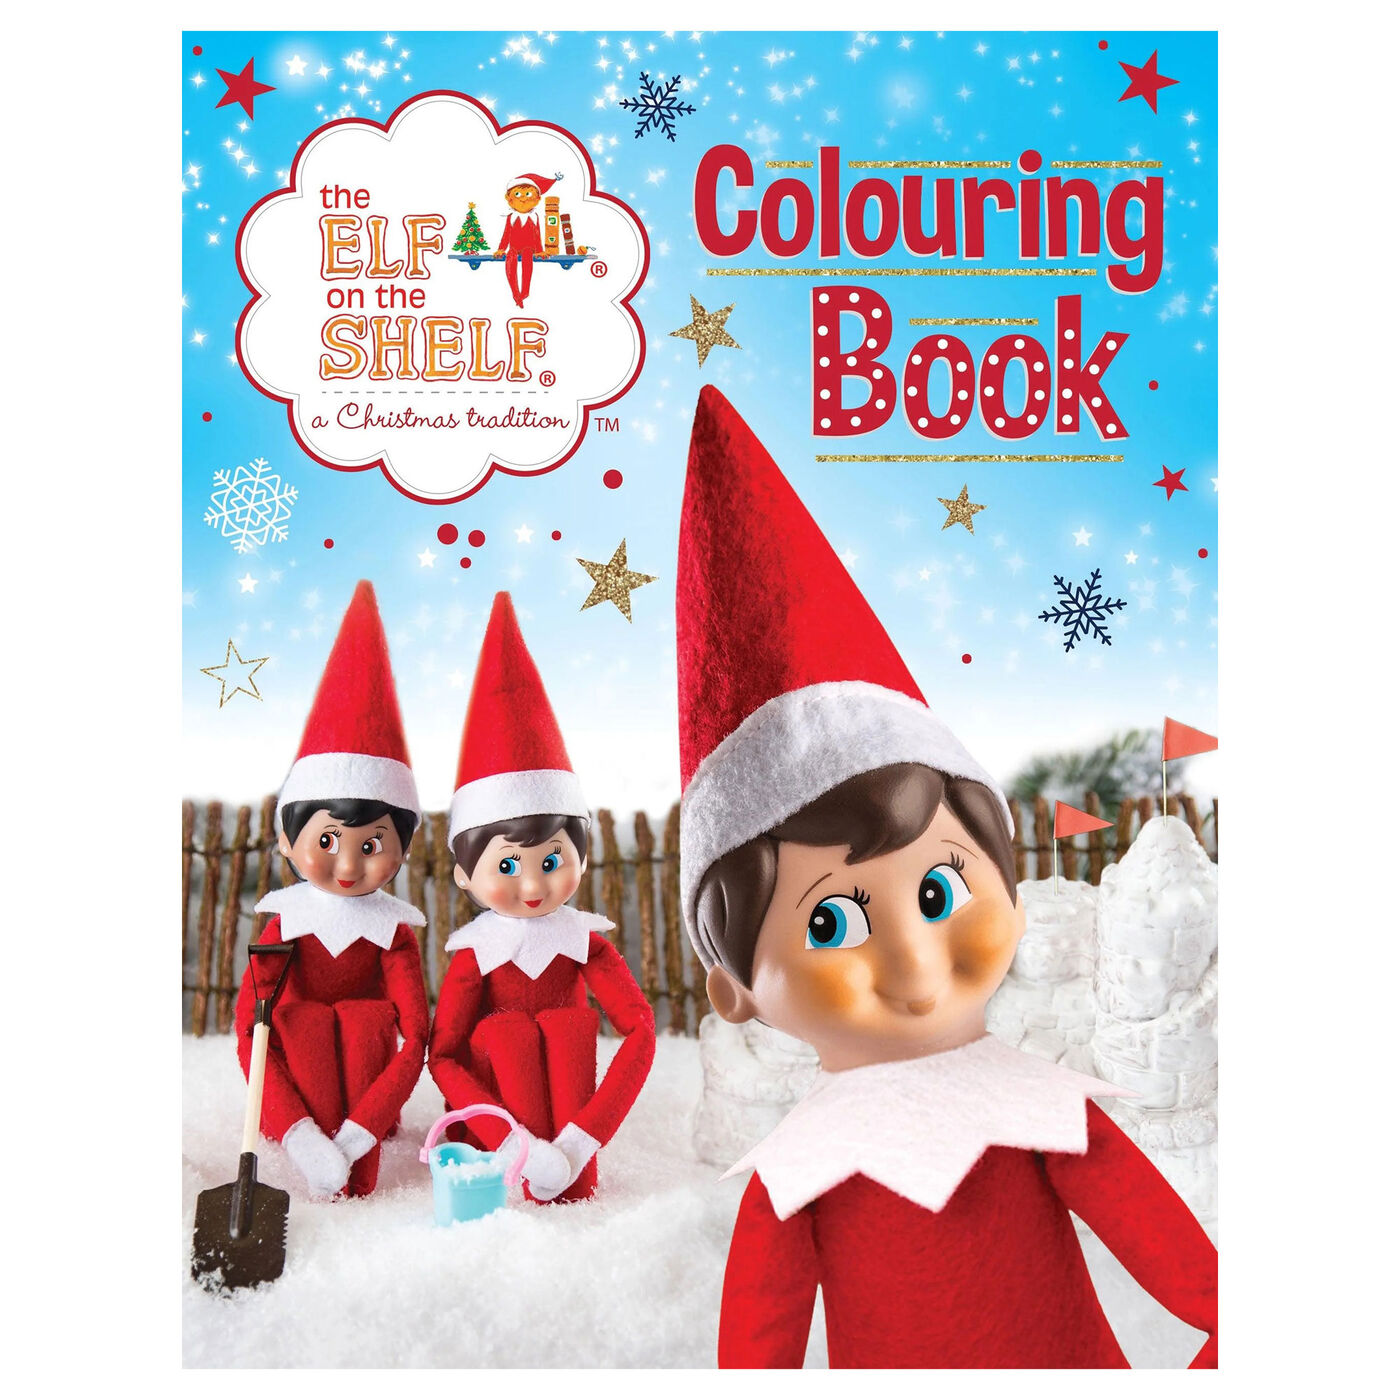 Buy The Elf on the Shelf Activity Pack for GBP 6.99 | Card Factory UK